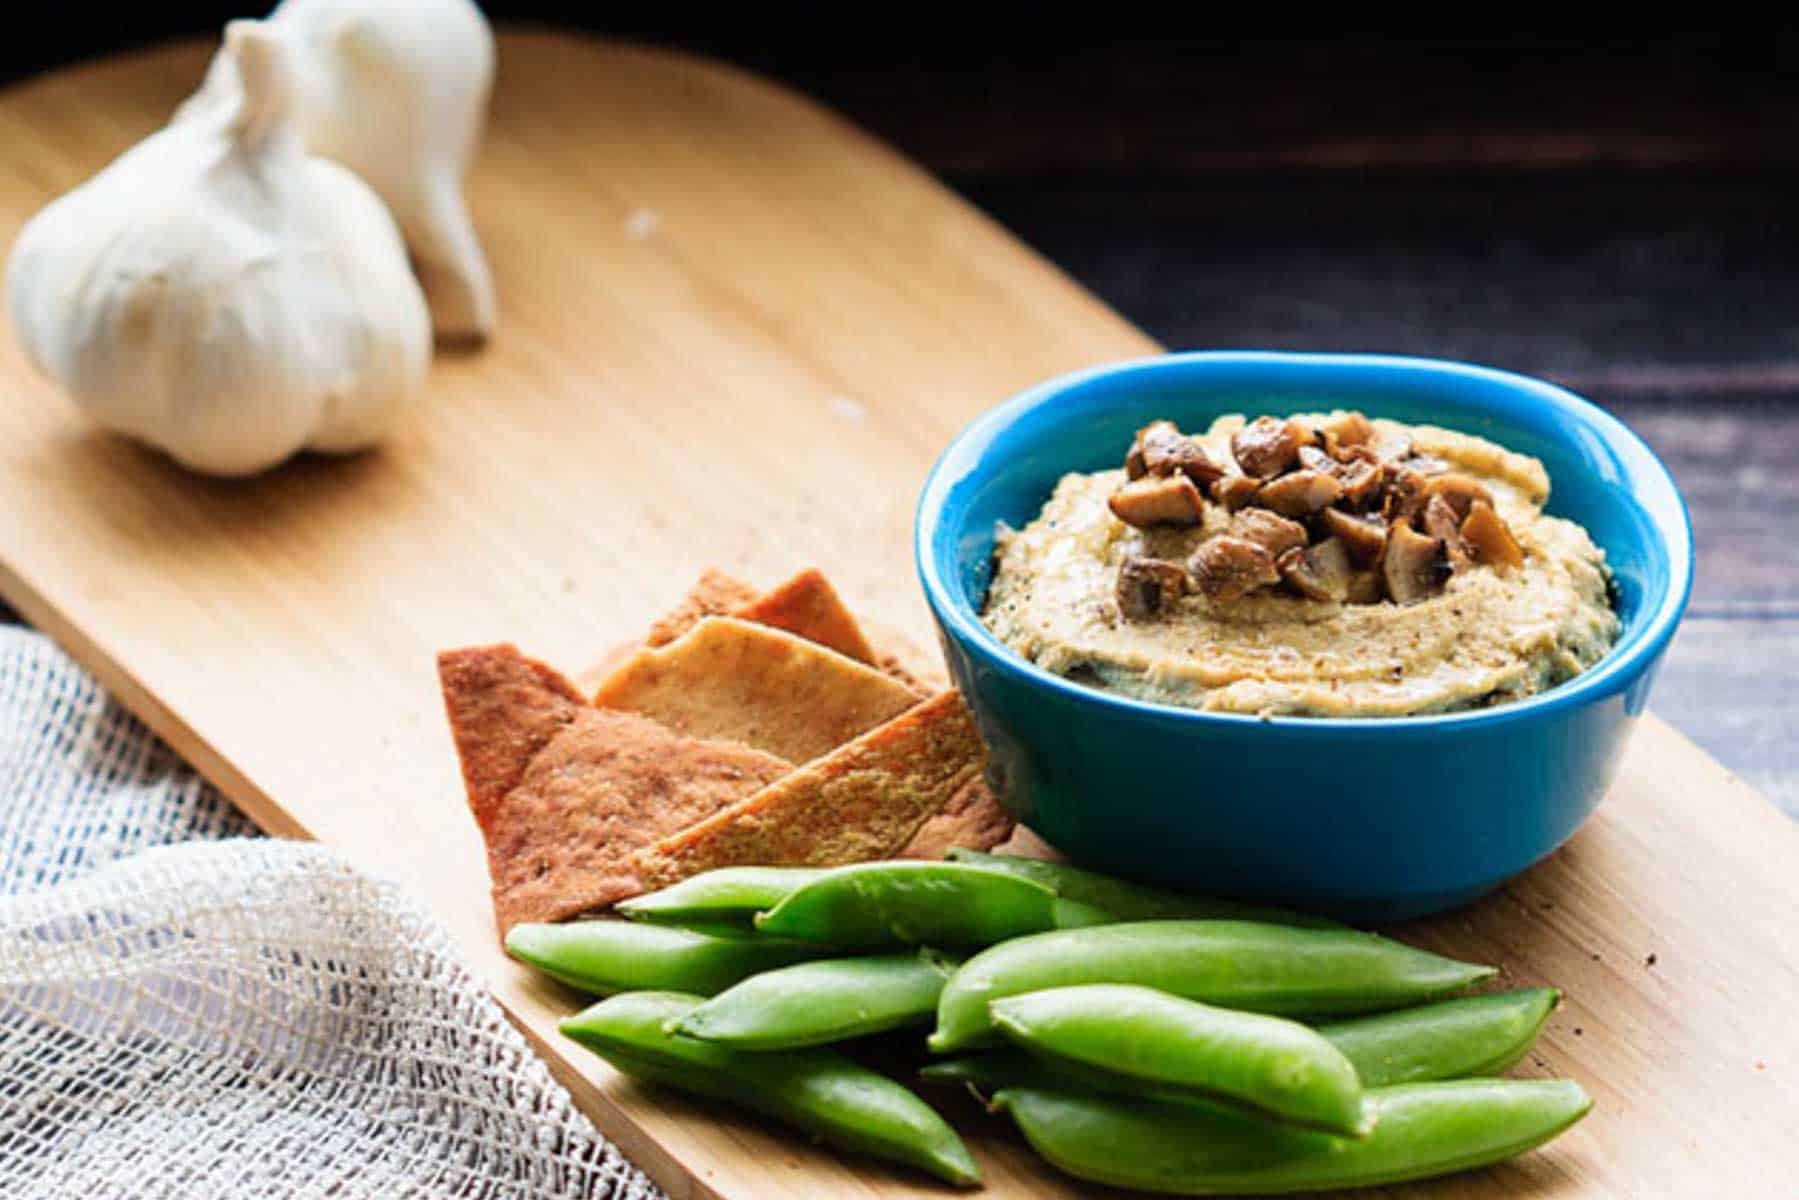 A blue bowl of hummus on a wooden board with sugar snap peas and pita chips plus heads of garlic in the background.